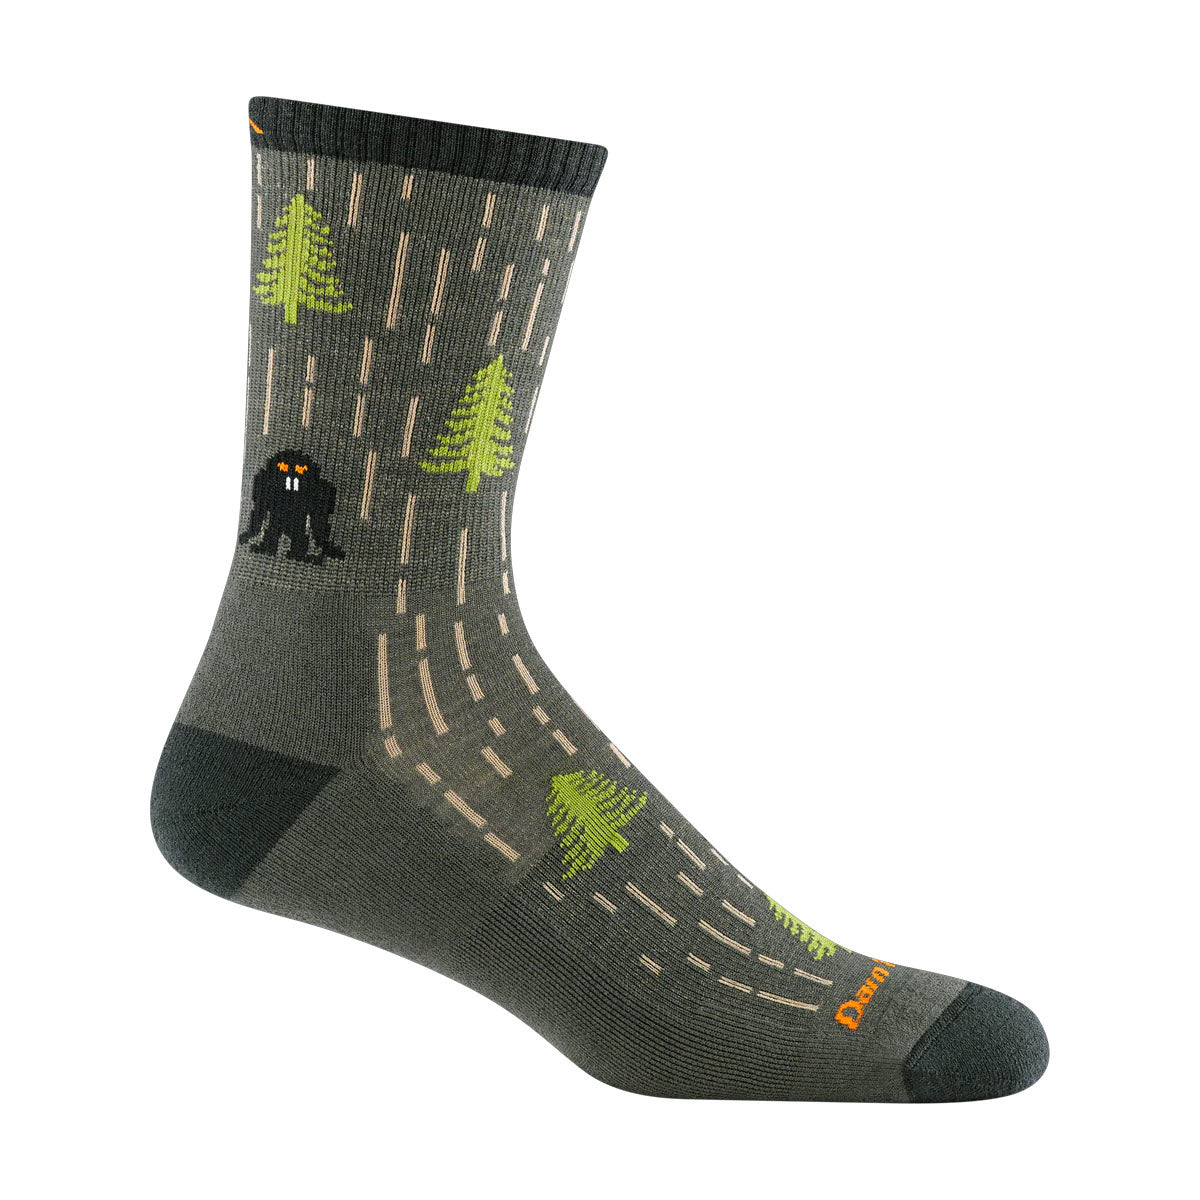 A single Darn Tough sock featuring a pattern of green pine trees, black bears, and orange dotted trails, with a lightweight micro crew design and reinforced heel and toe areas.